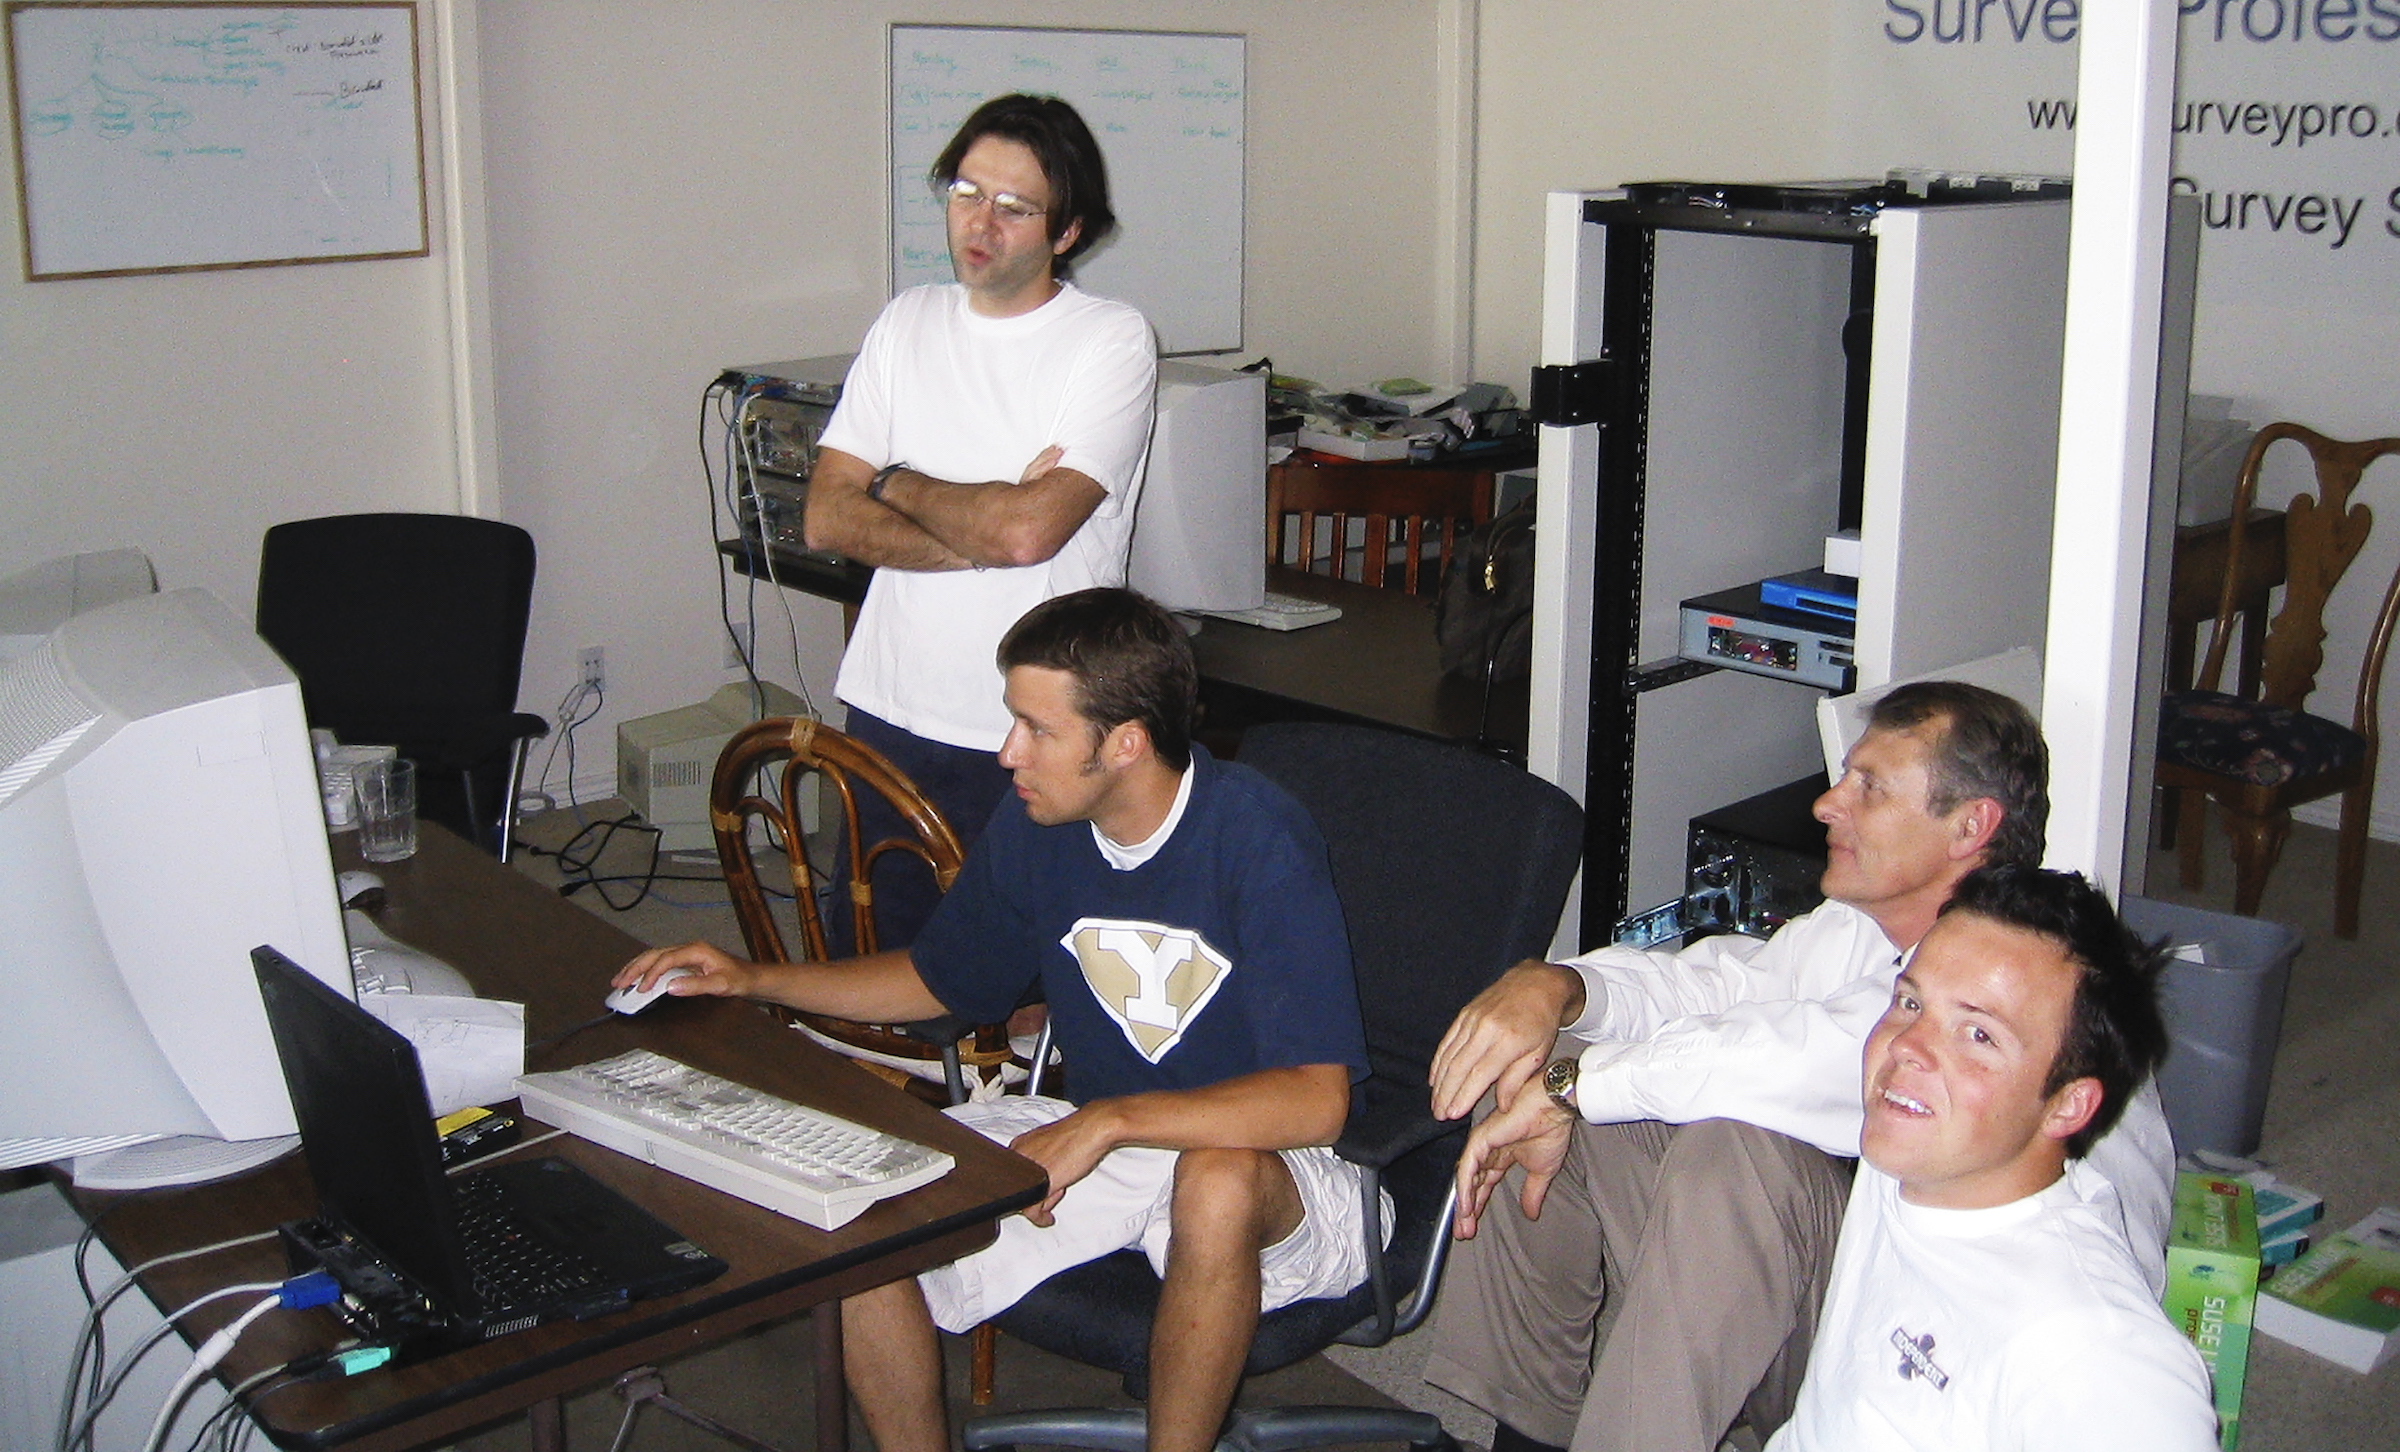 The founders of Qualtrics in 2005